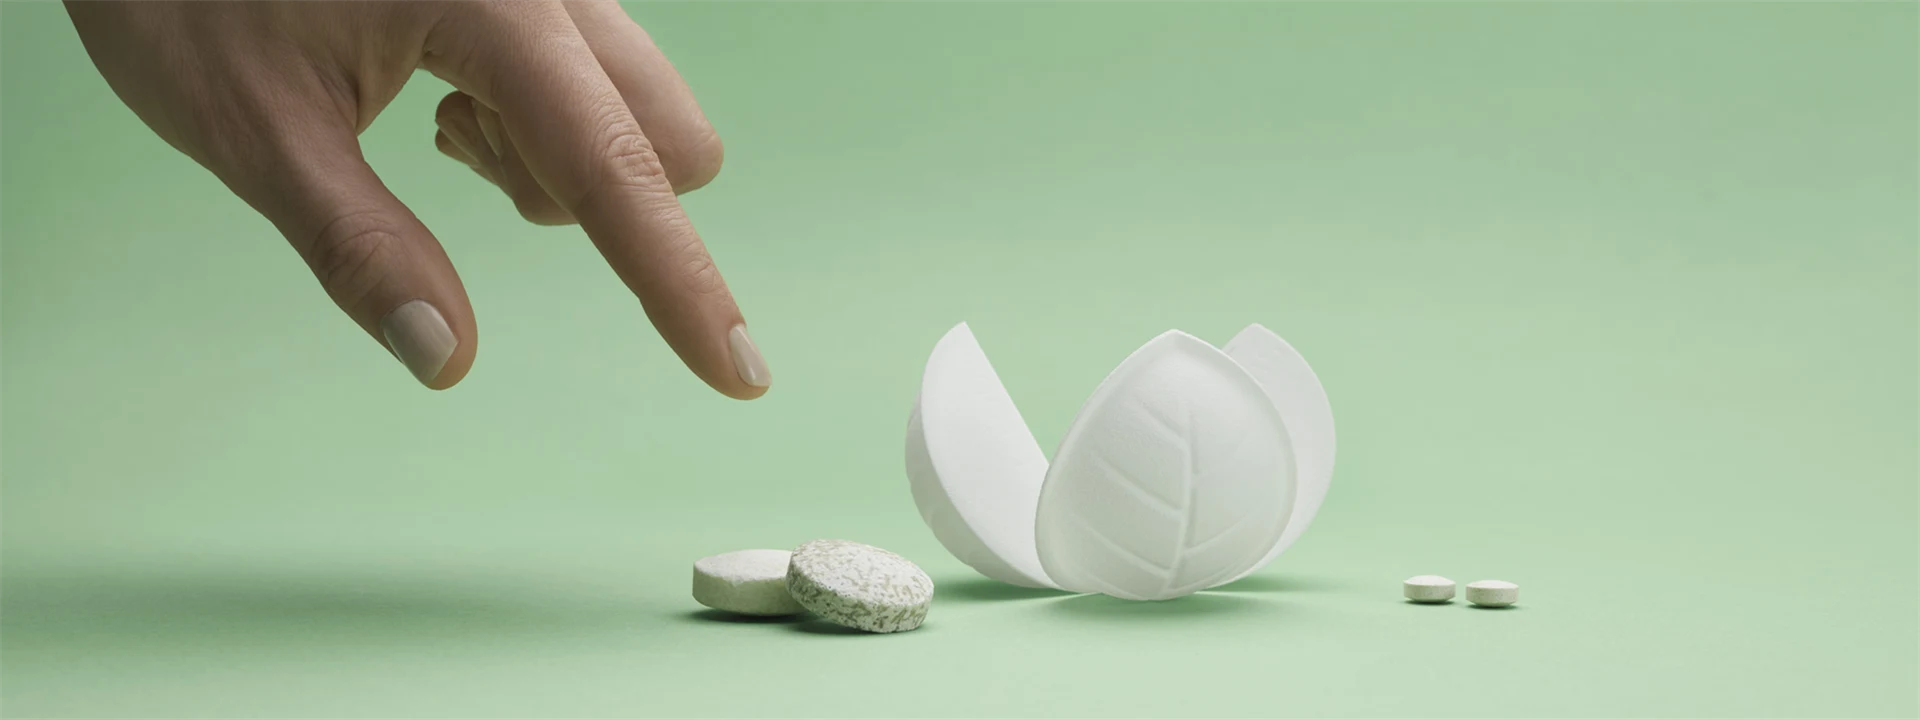 FIngers pointing at dissolvable tablets and a flower-like piece of packaging on green background